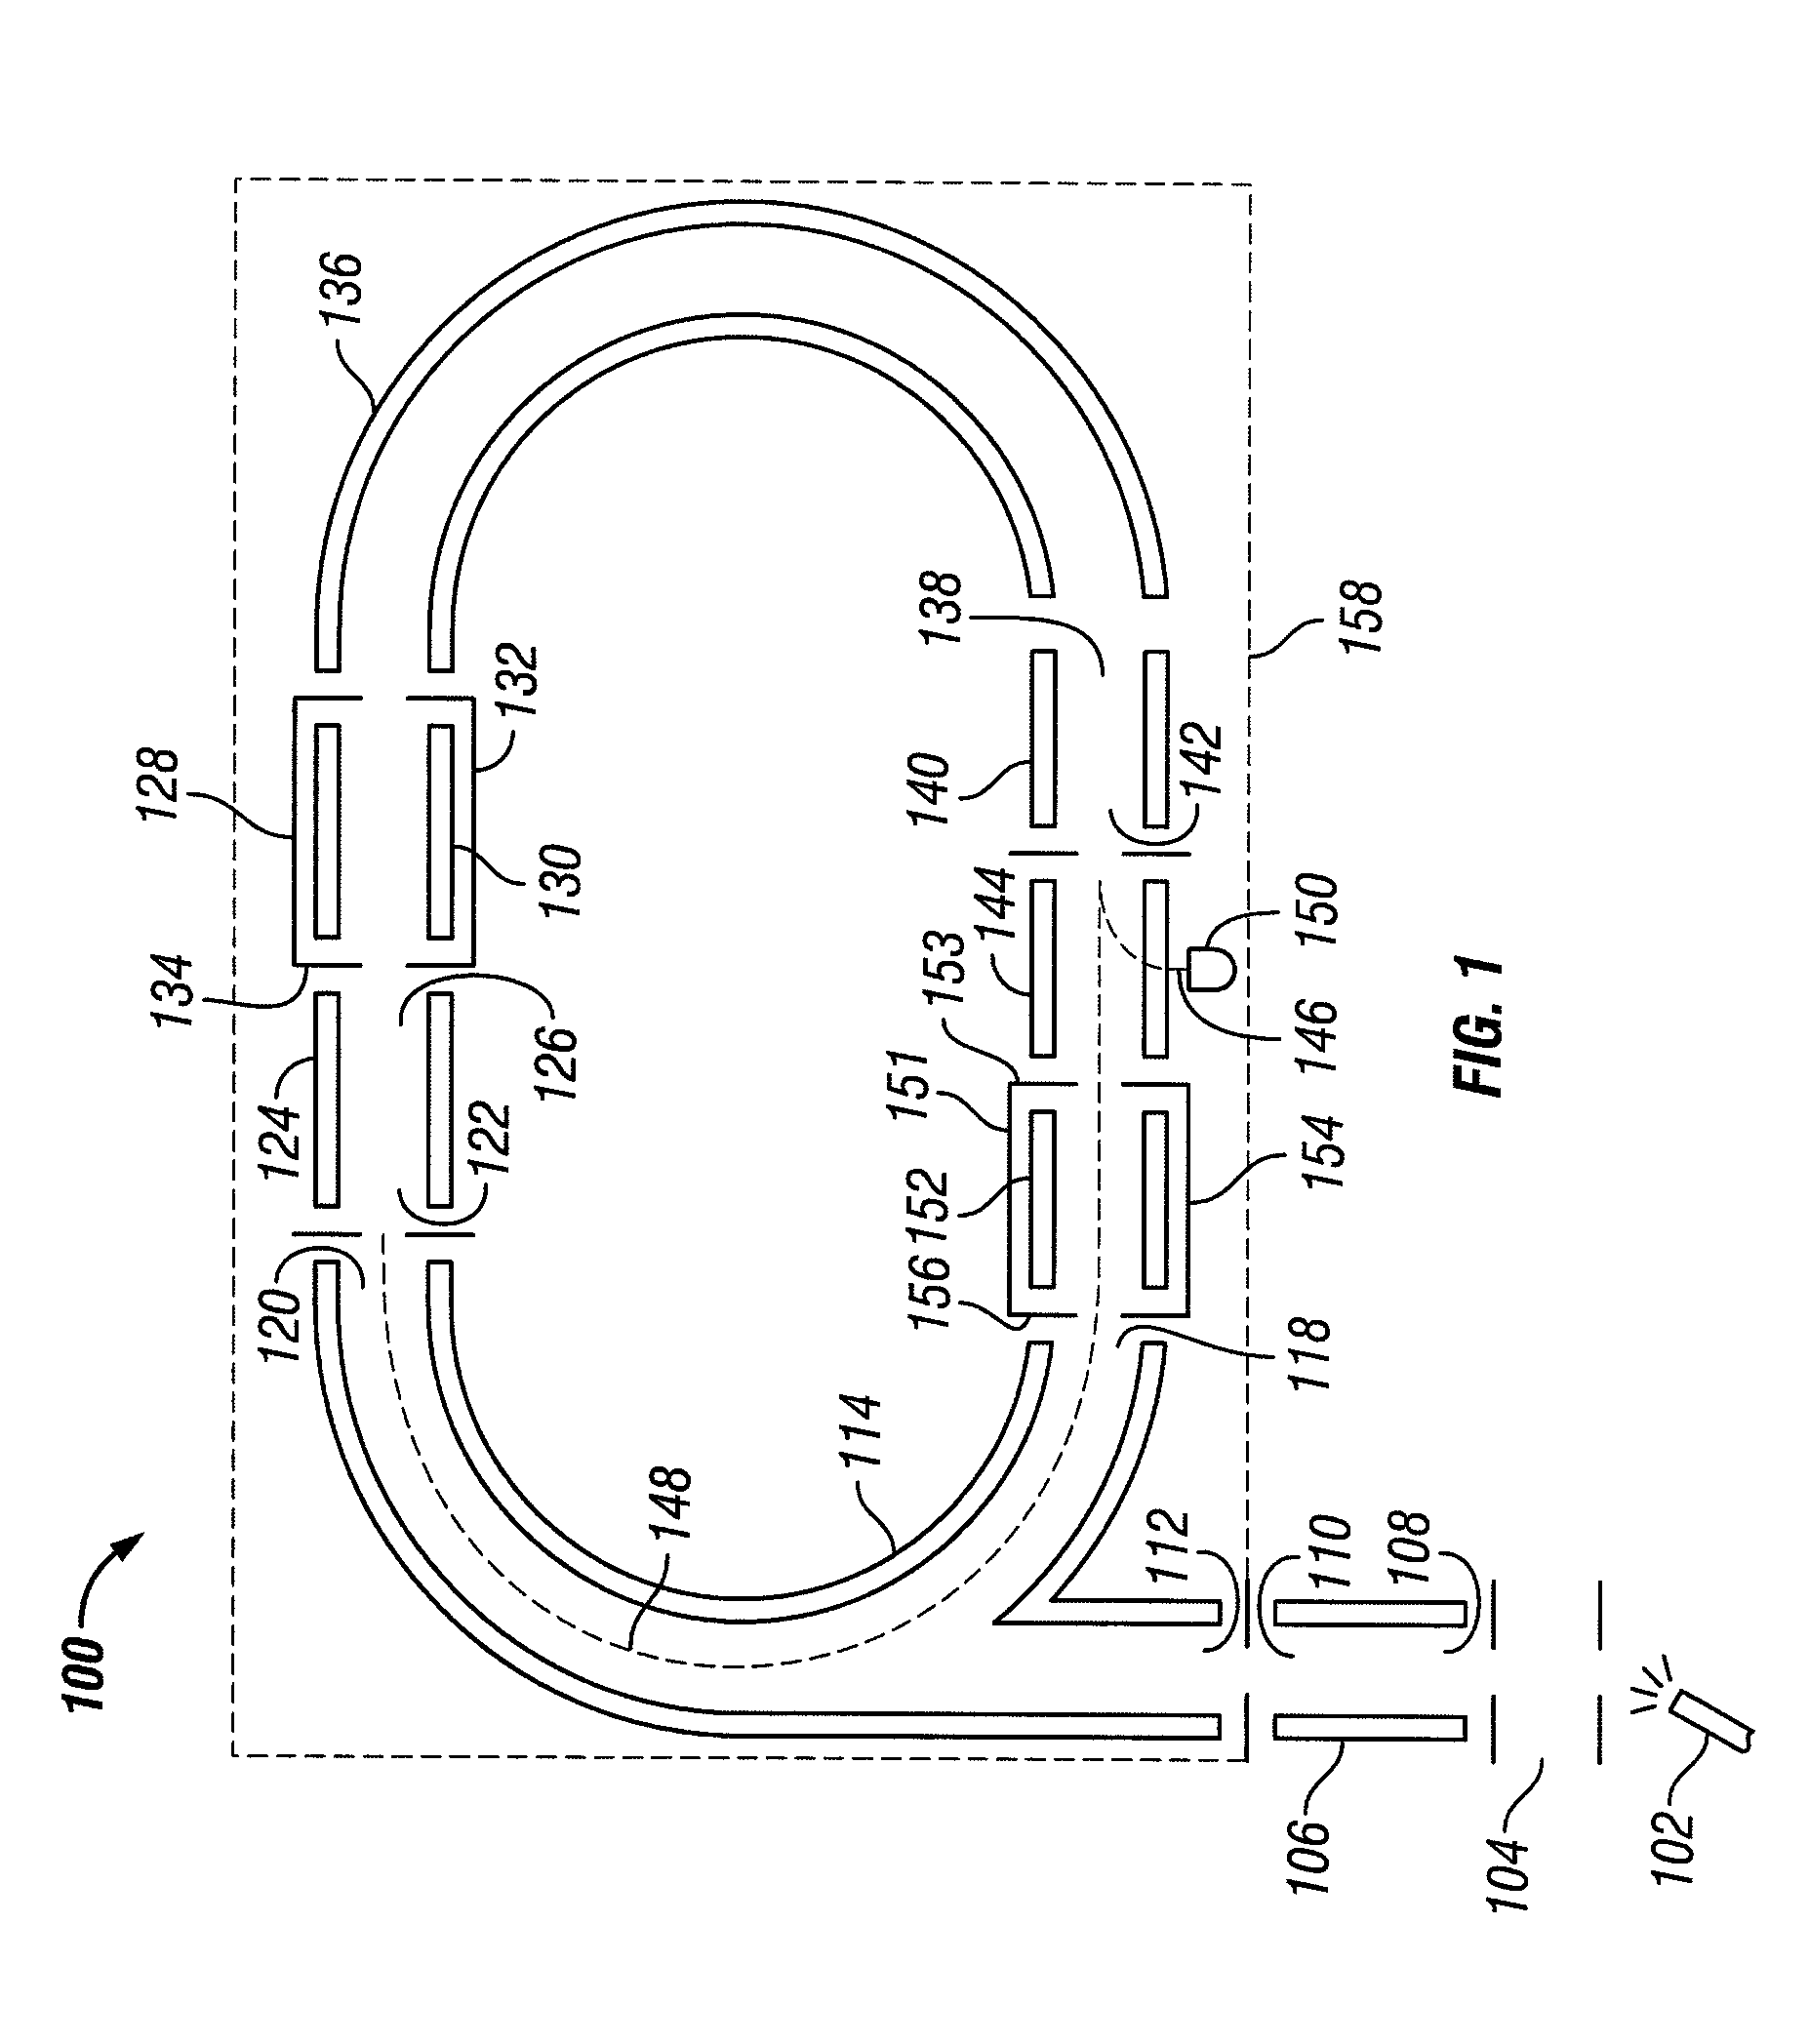 Mass spectrometer with looped ion path